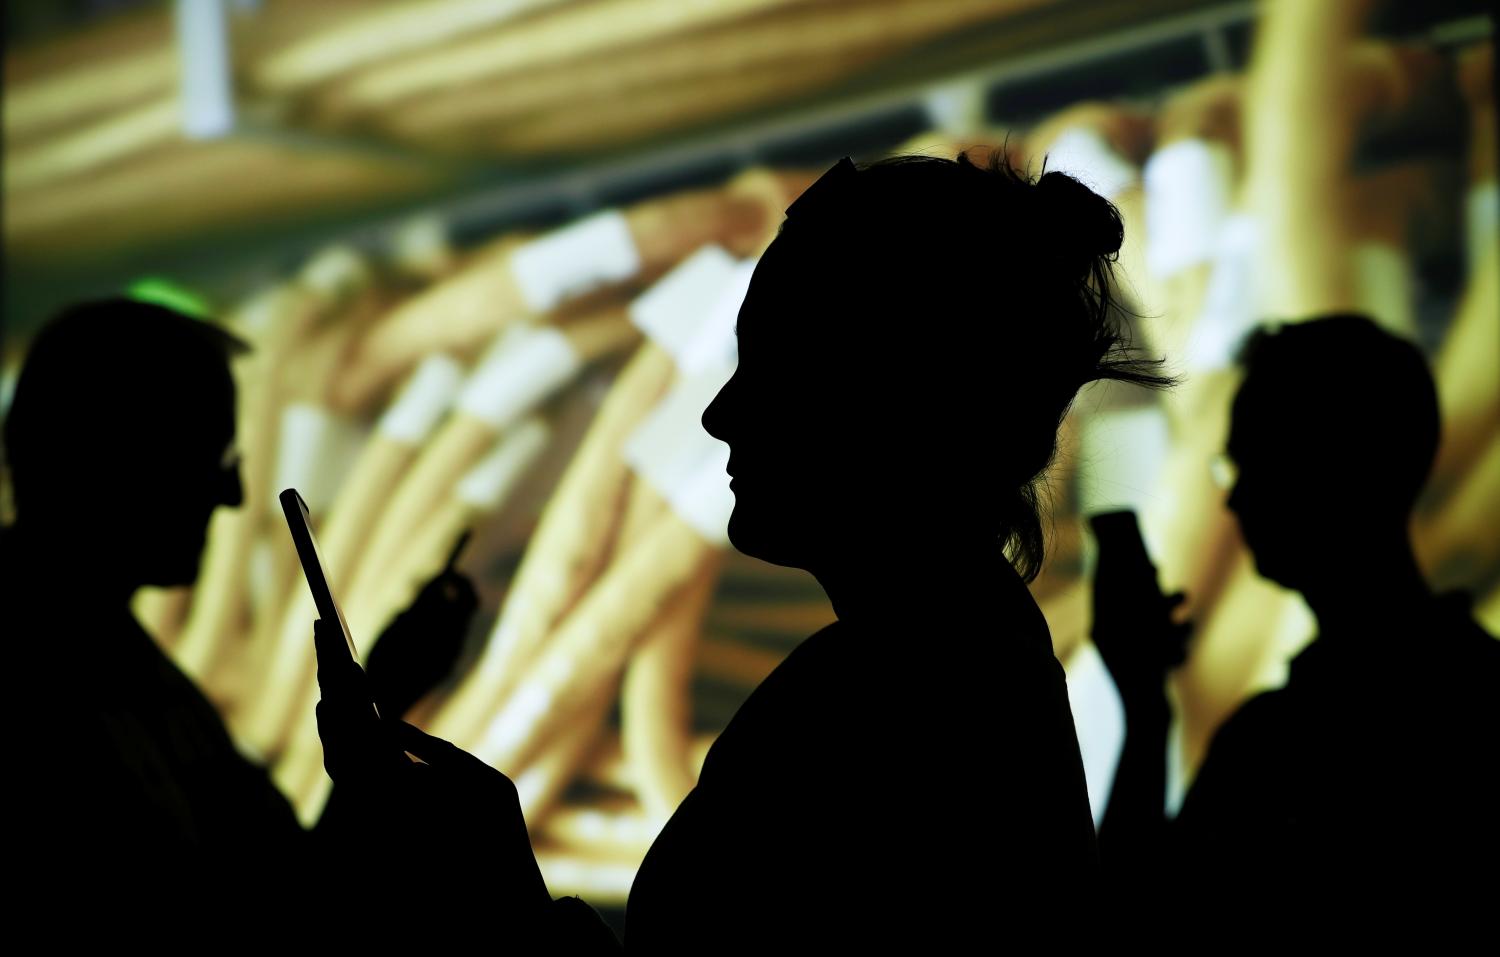 People in silhouette look at their mobile phones with cables from an internet switching station projected in the background.